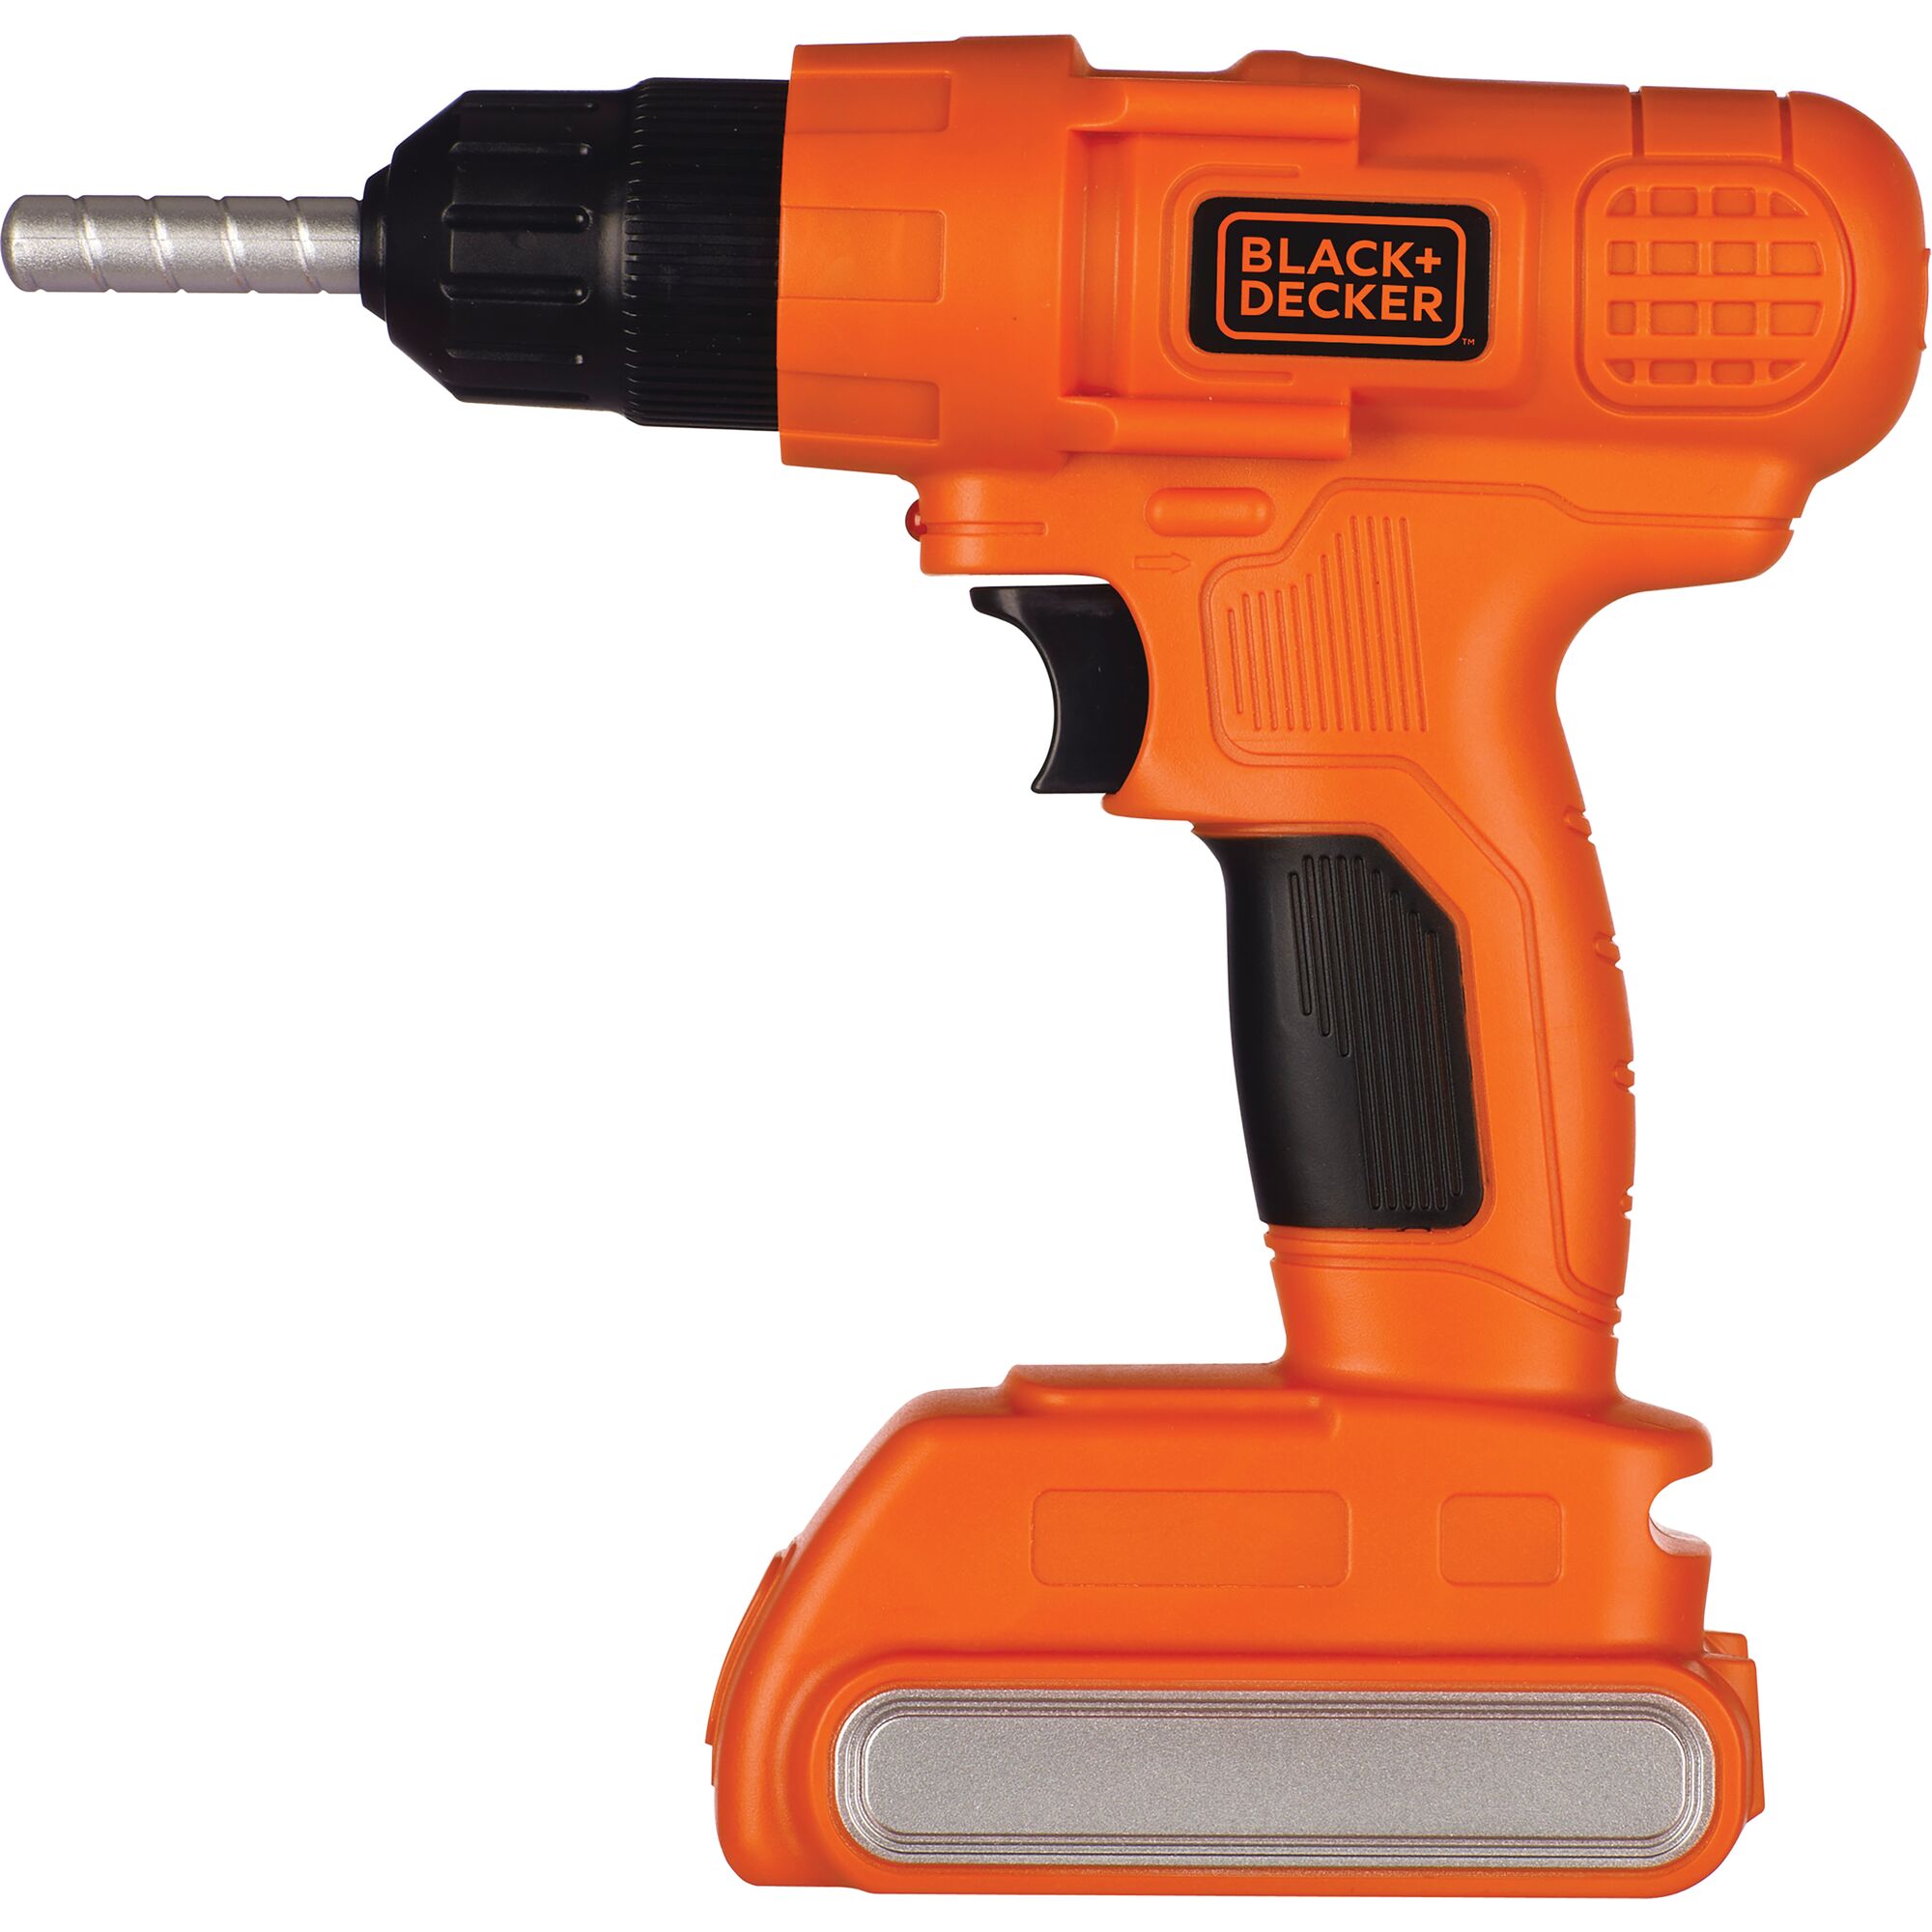 Profile of power play tools electronic drill.